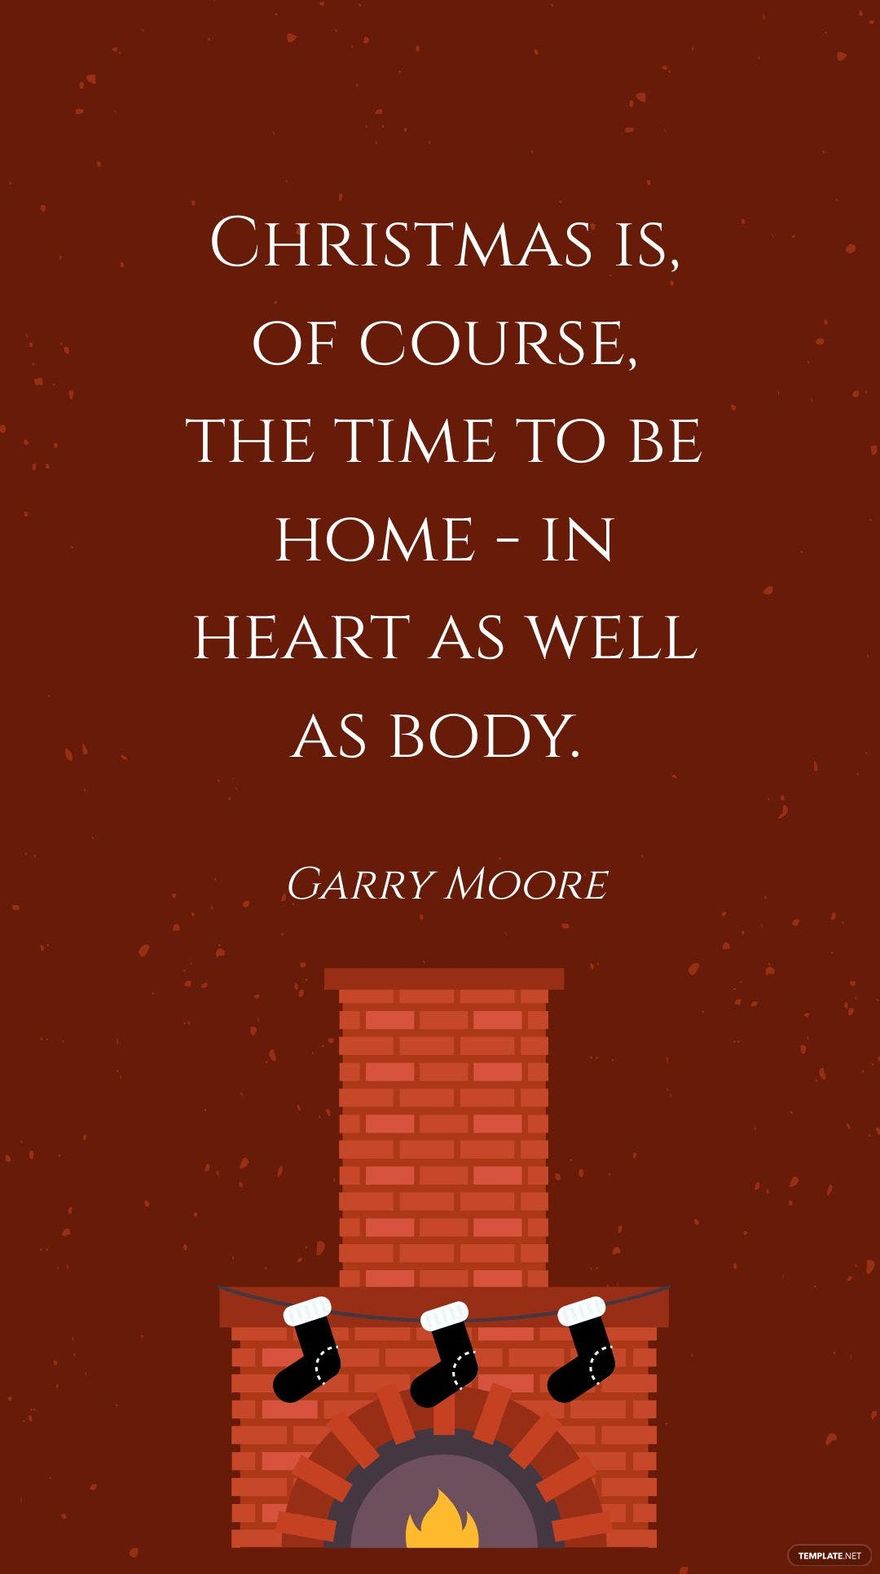 Garry Moore - Christmas is, of course, the time to be home - in heart as well as body. in JPG